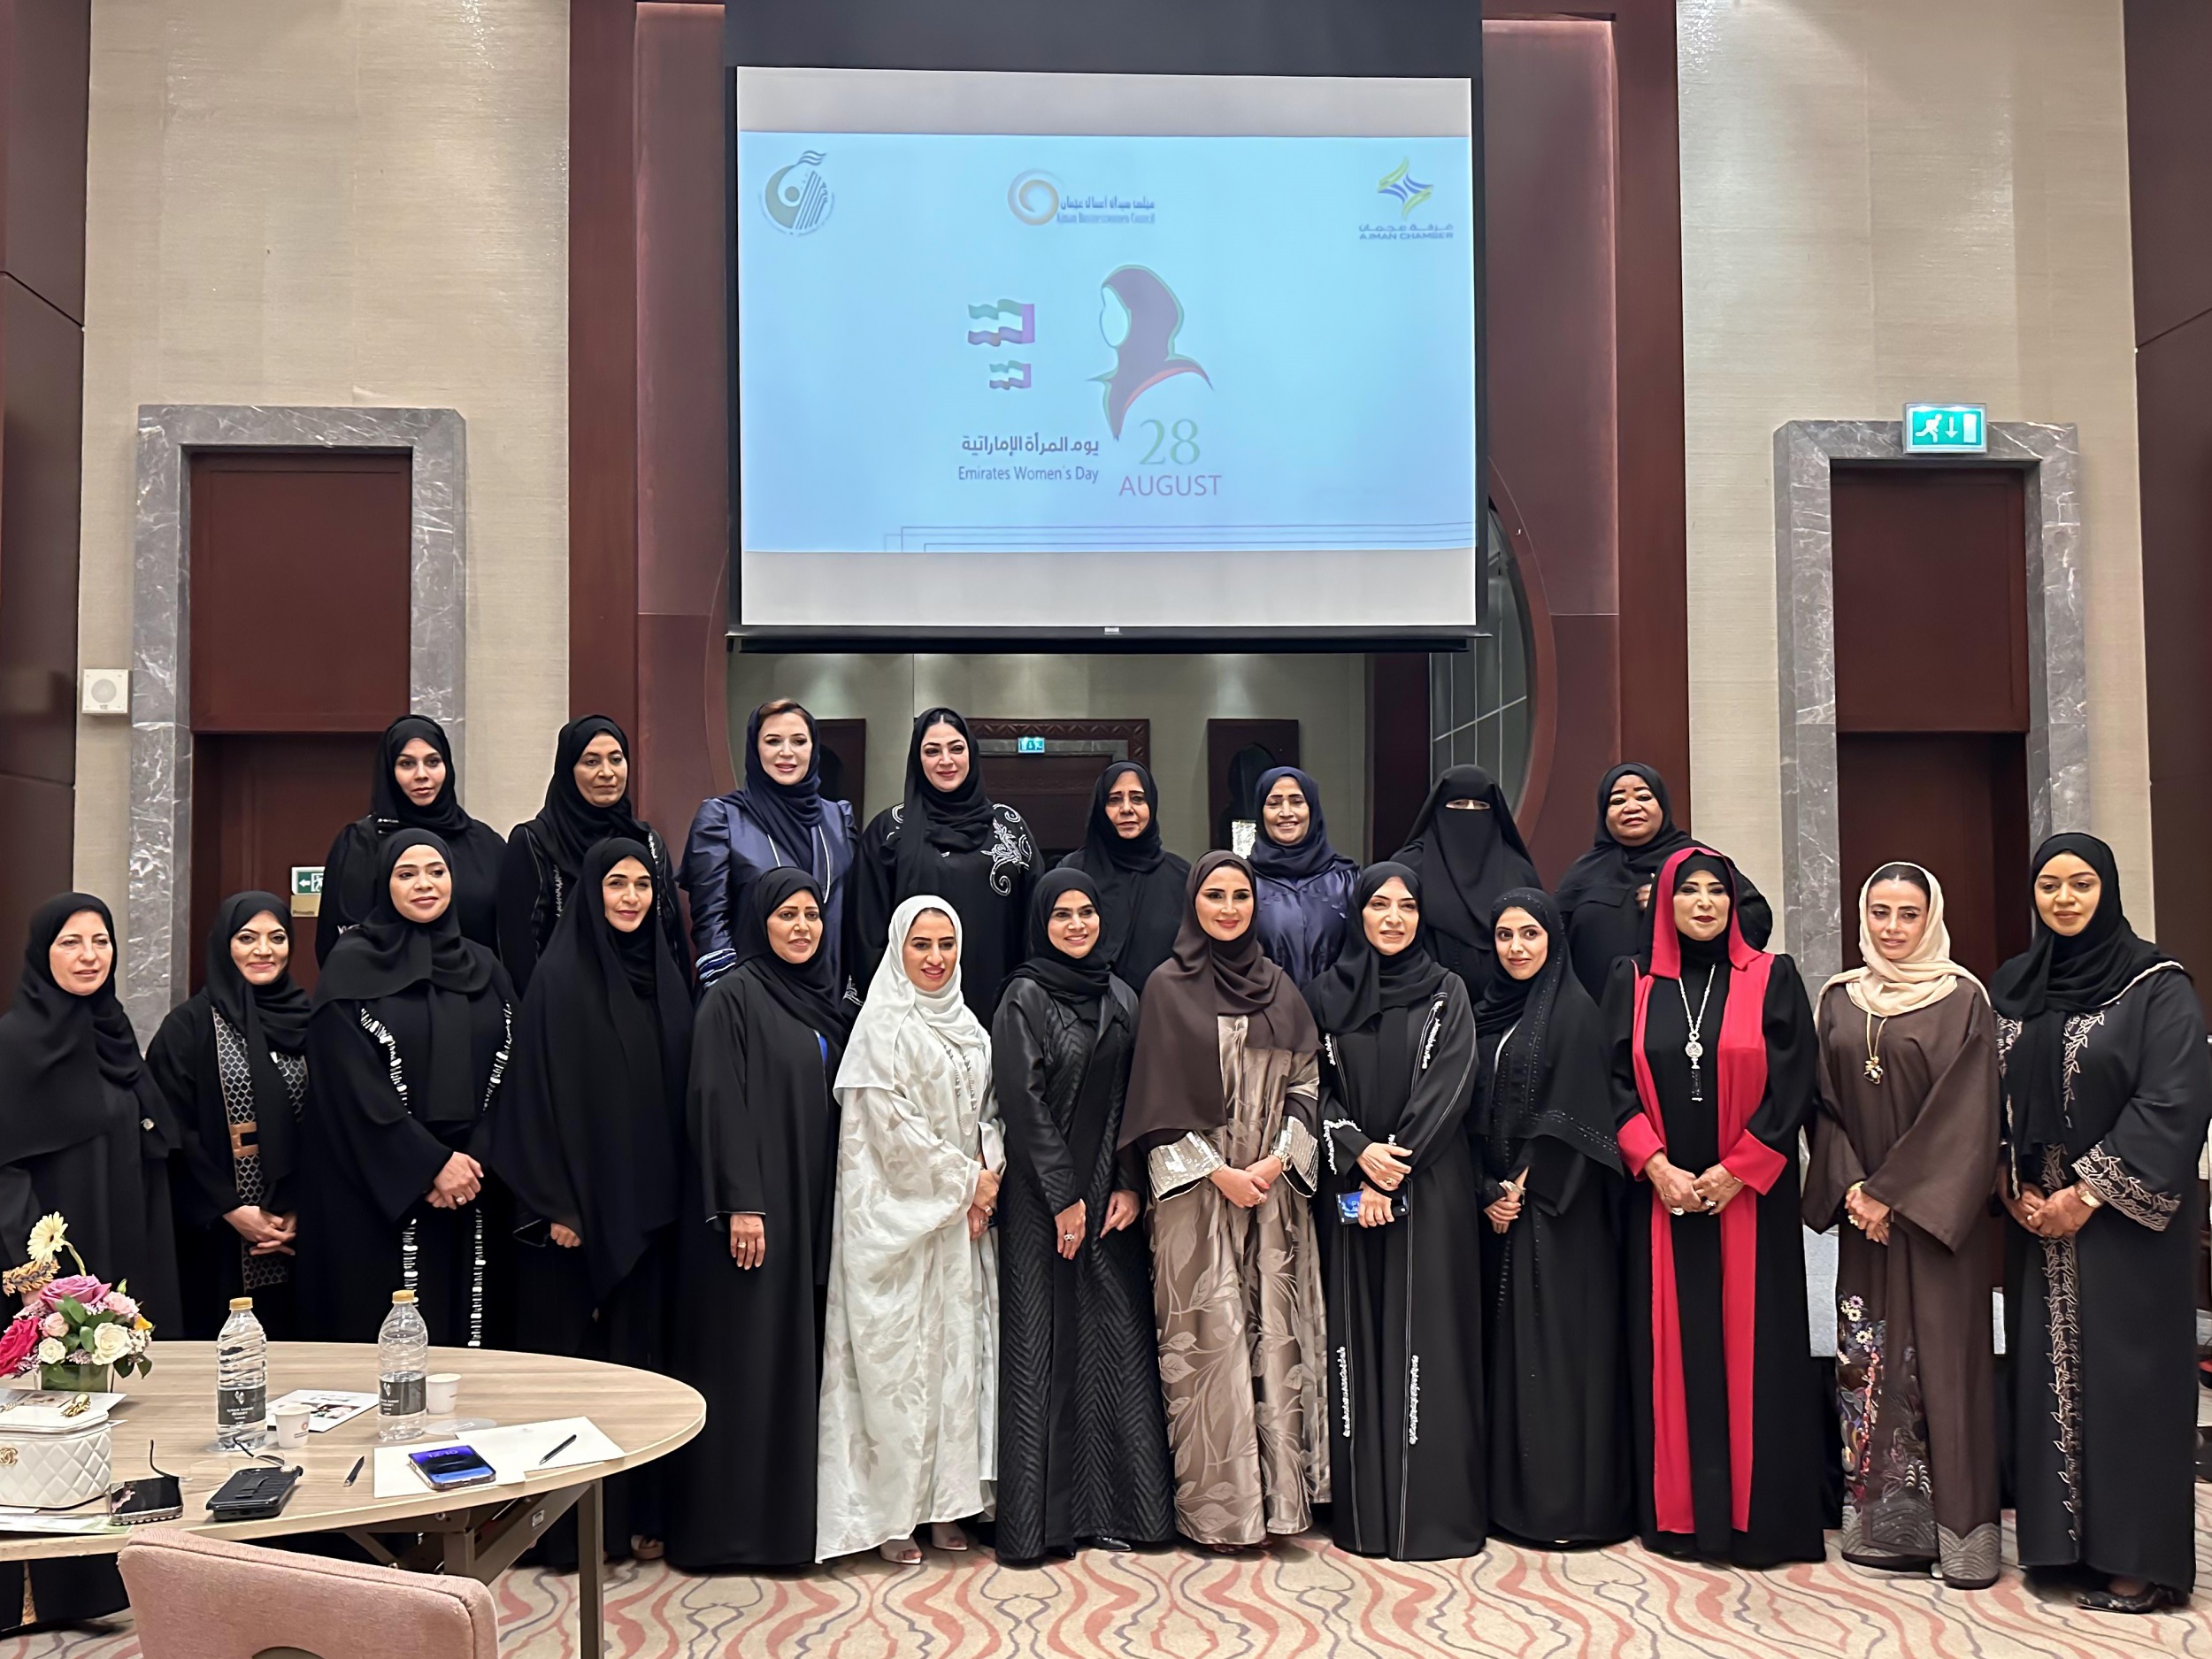 Ajman Chamber and AJBWC organize a celebration on the occasion of “Emirati Women’s Day”